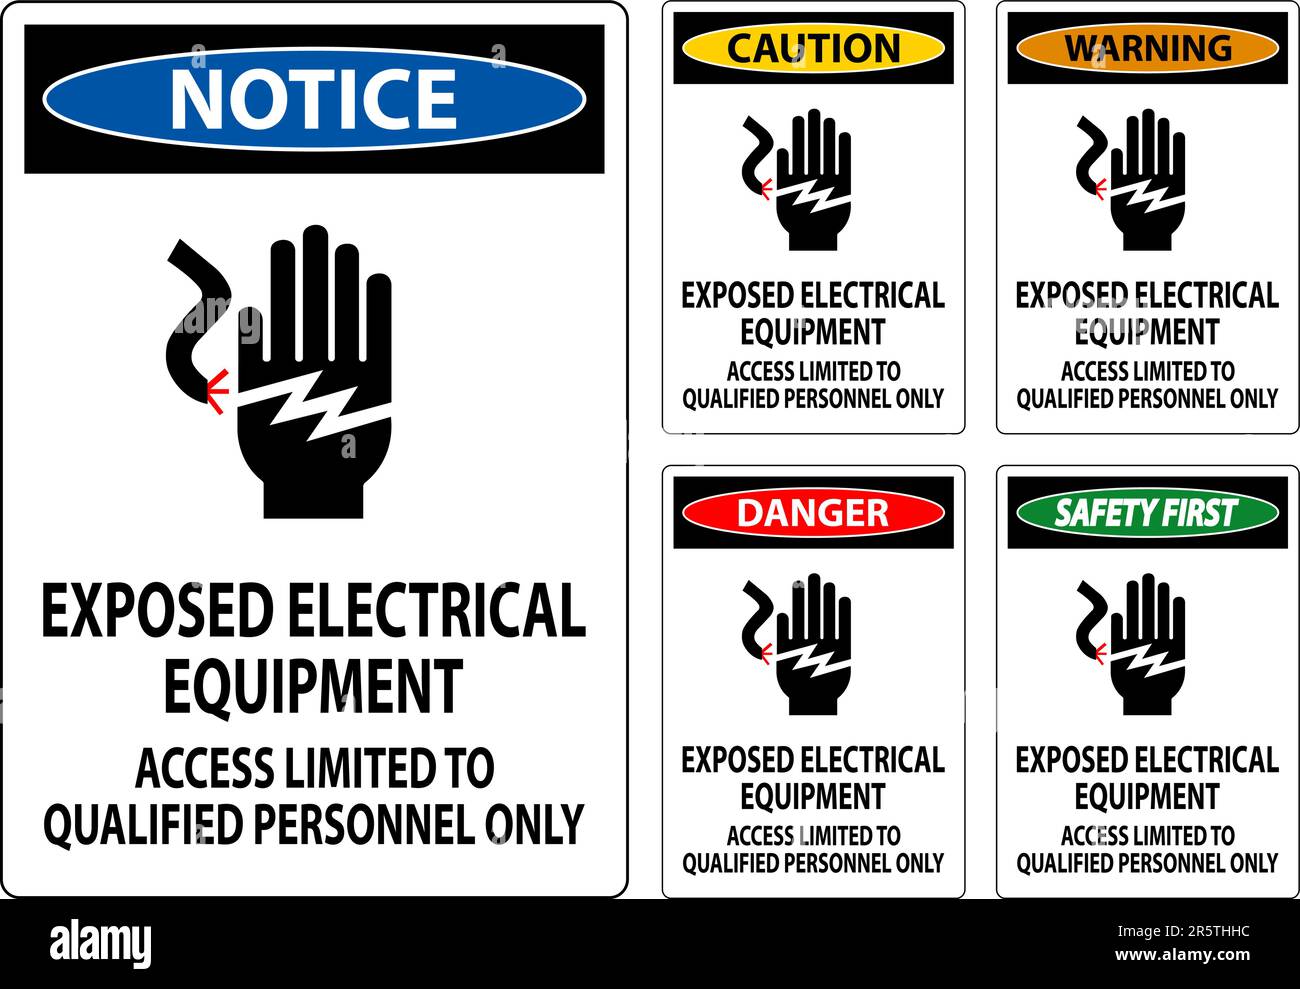 Danger Sign Exposed Electrical Equipment, Access Limited To Qualified Personnel Only Stock Vector